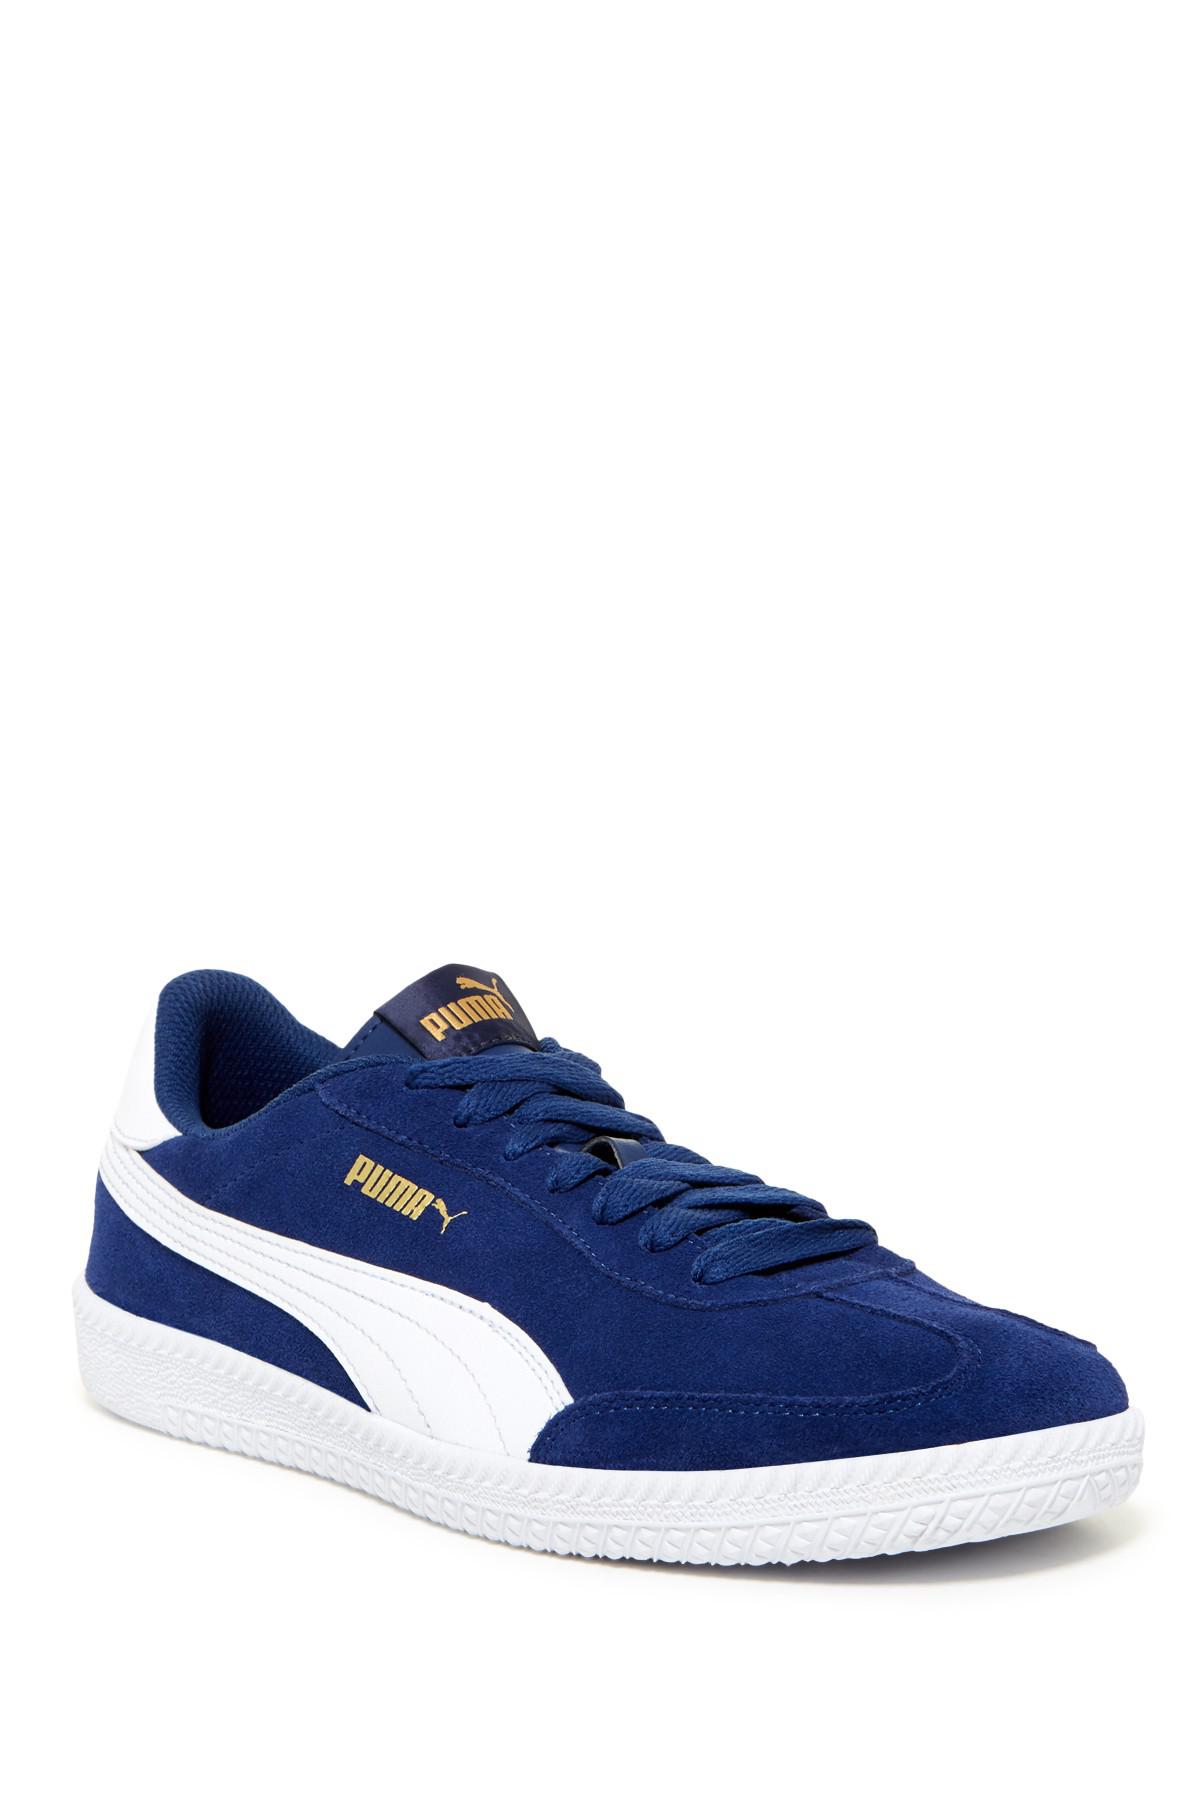 PUMA Leather Astro Cup Sneaker in Blue for Men | Lyst